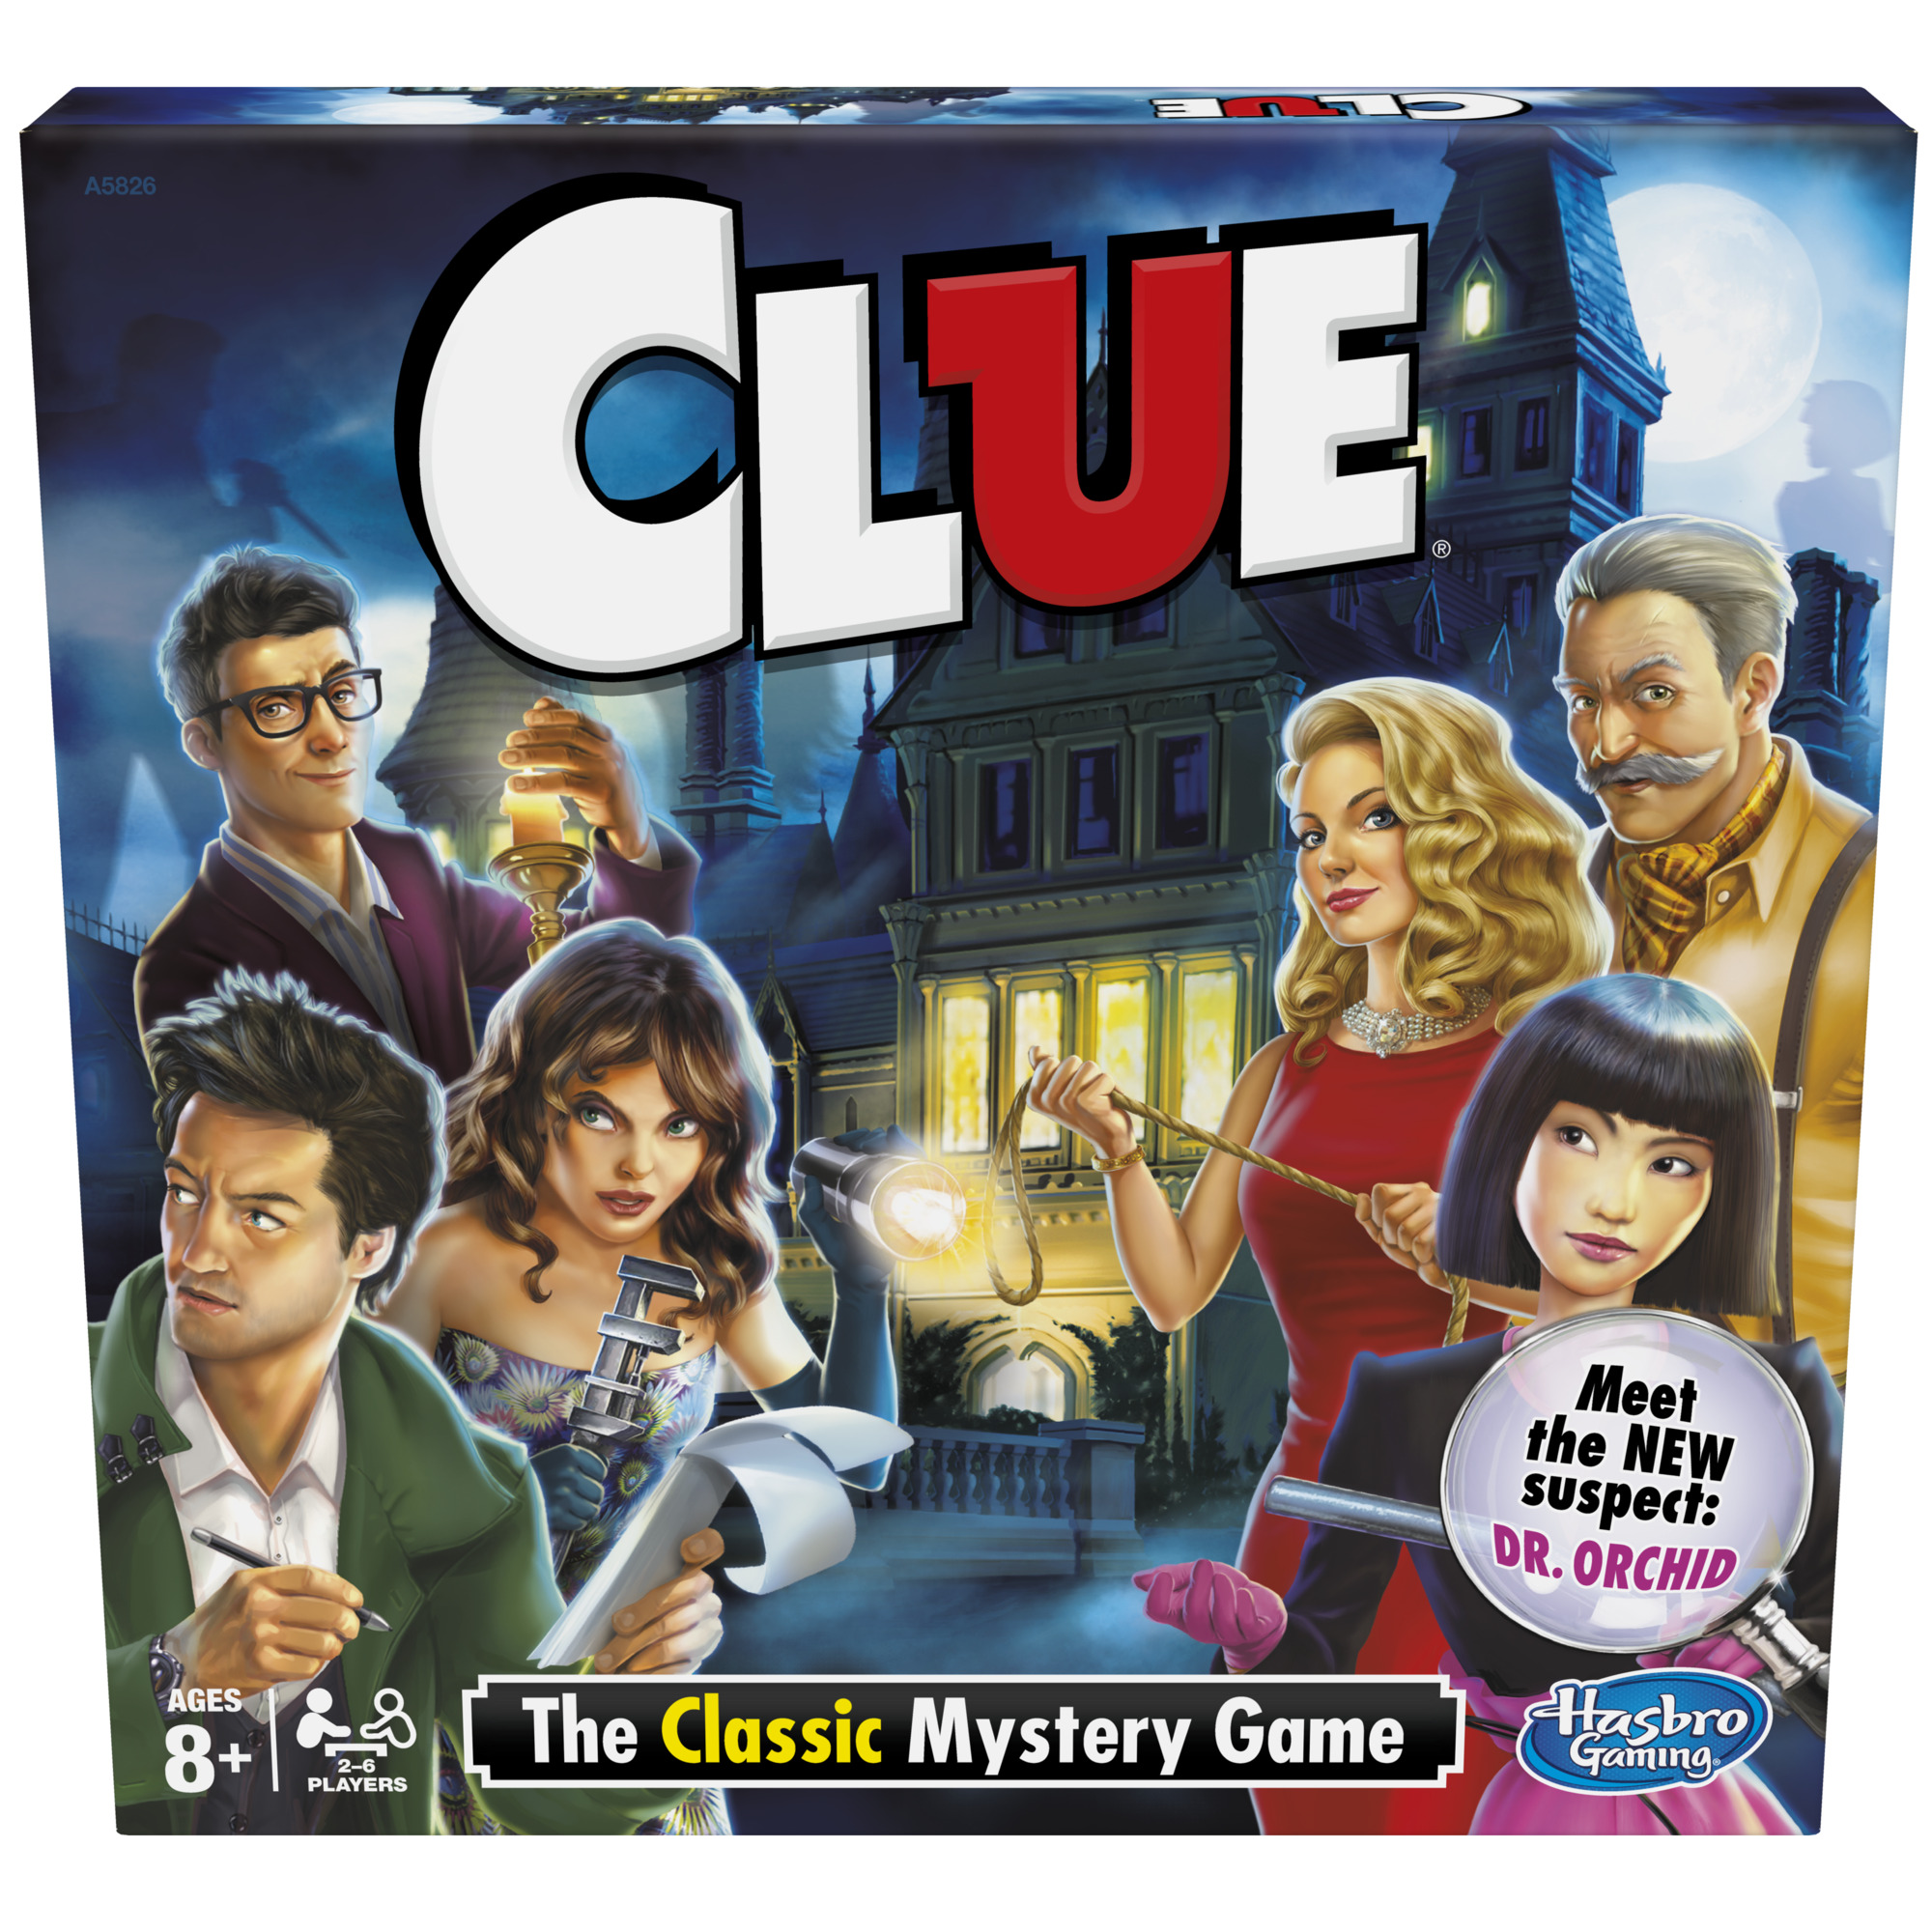 Clue Classic Mystery Board Game with Activity Sheet for Kids and Family Ages 8 and Up, 2-6 Players, Only At Walmart - image 1 of 10